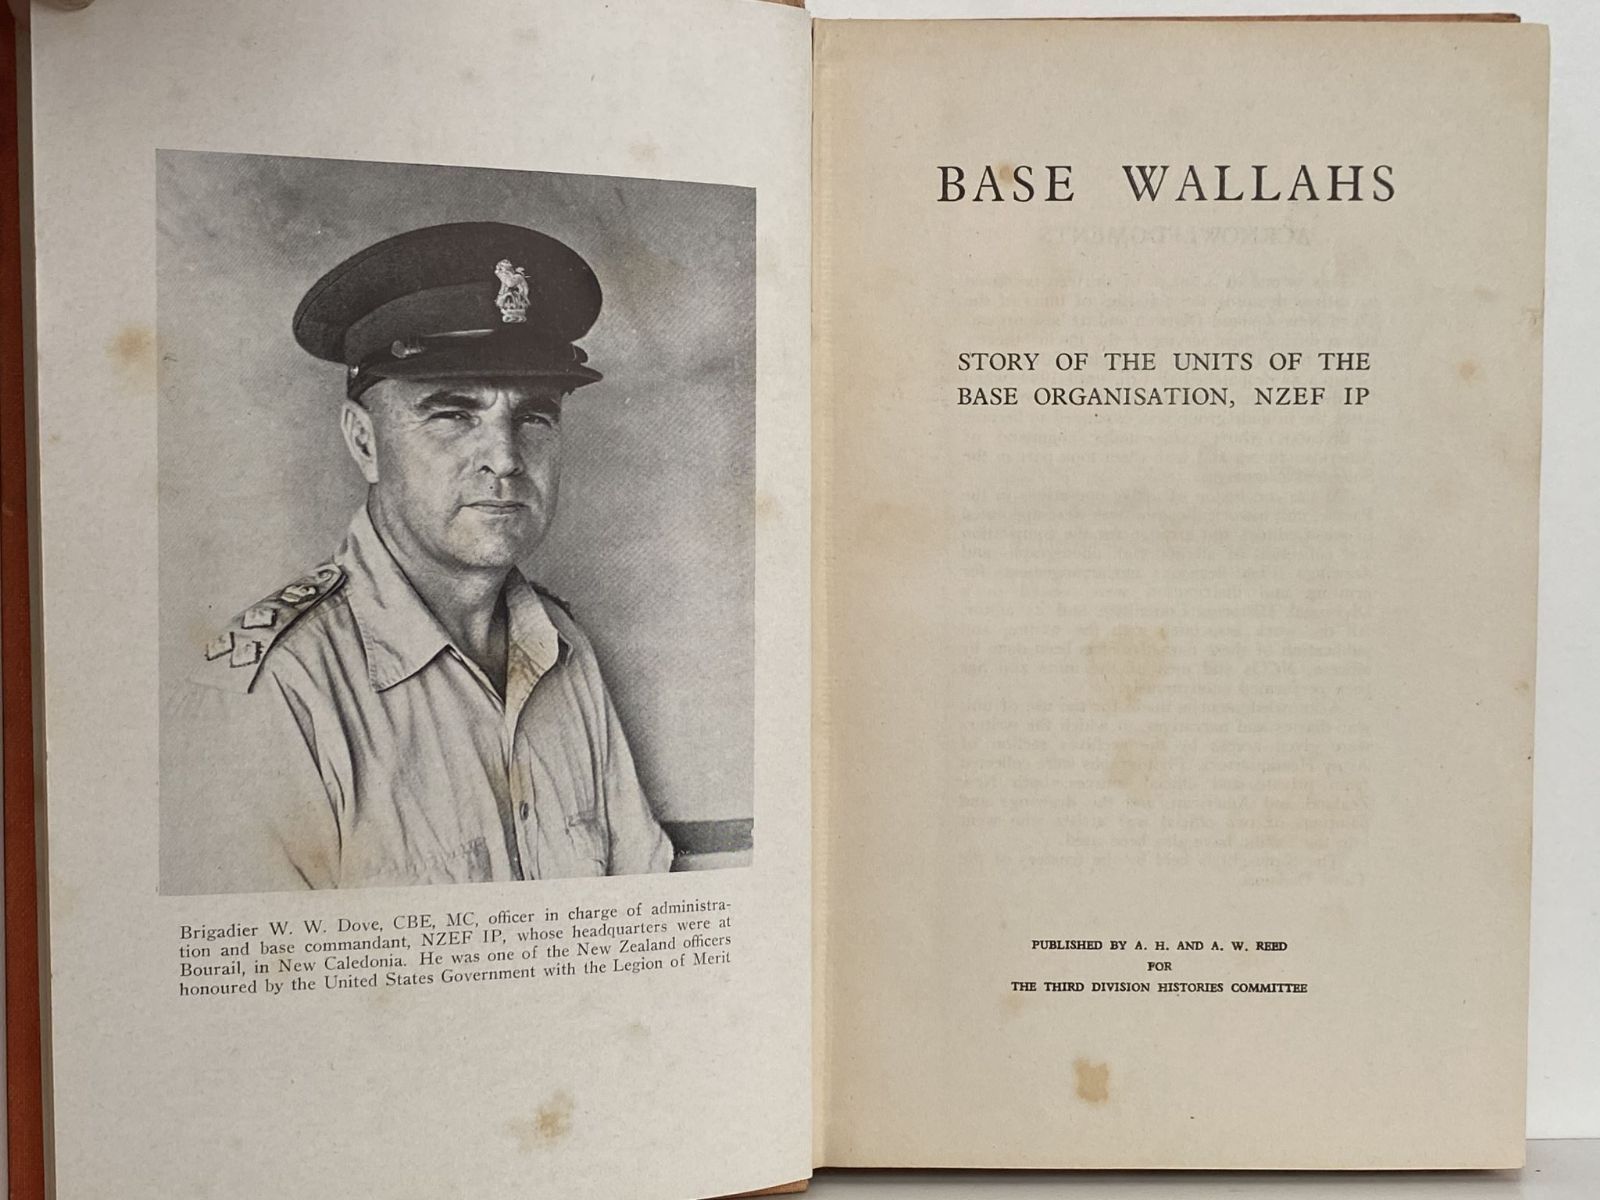 BASE WALLAHS: Story of the Units of the Base Organisation, NZEF IP